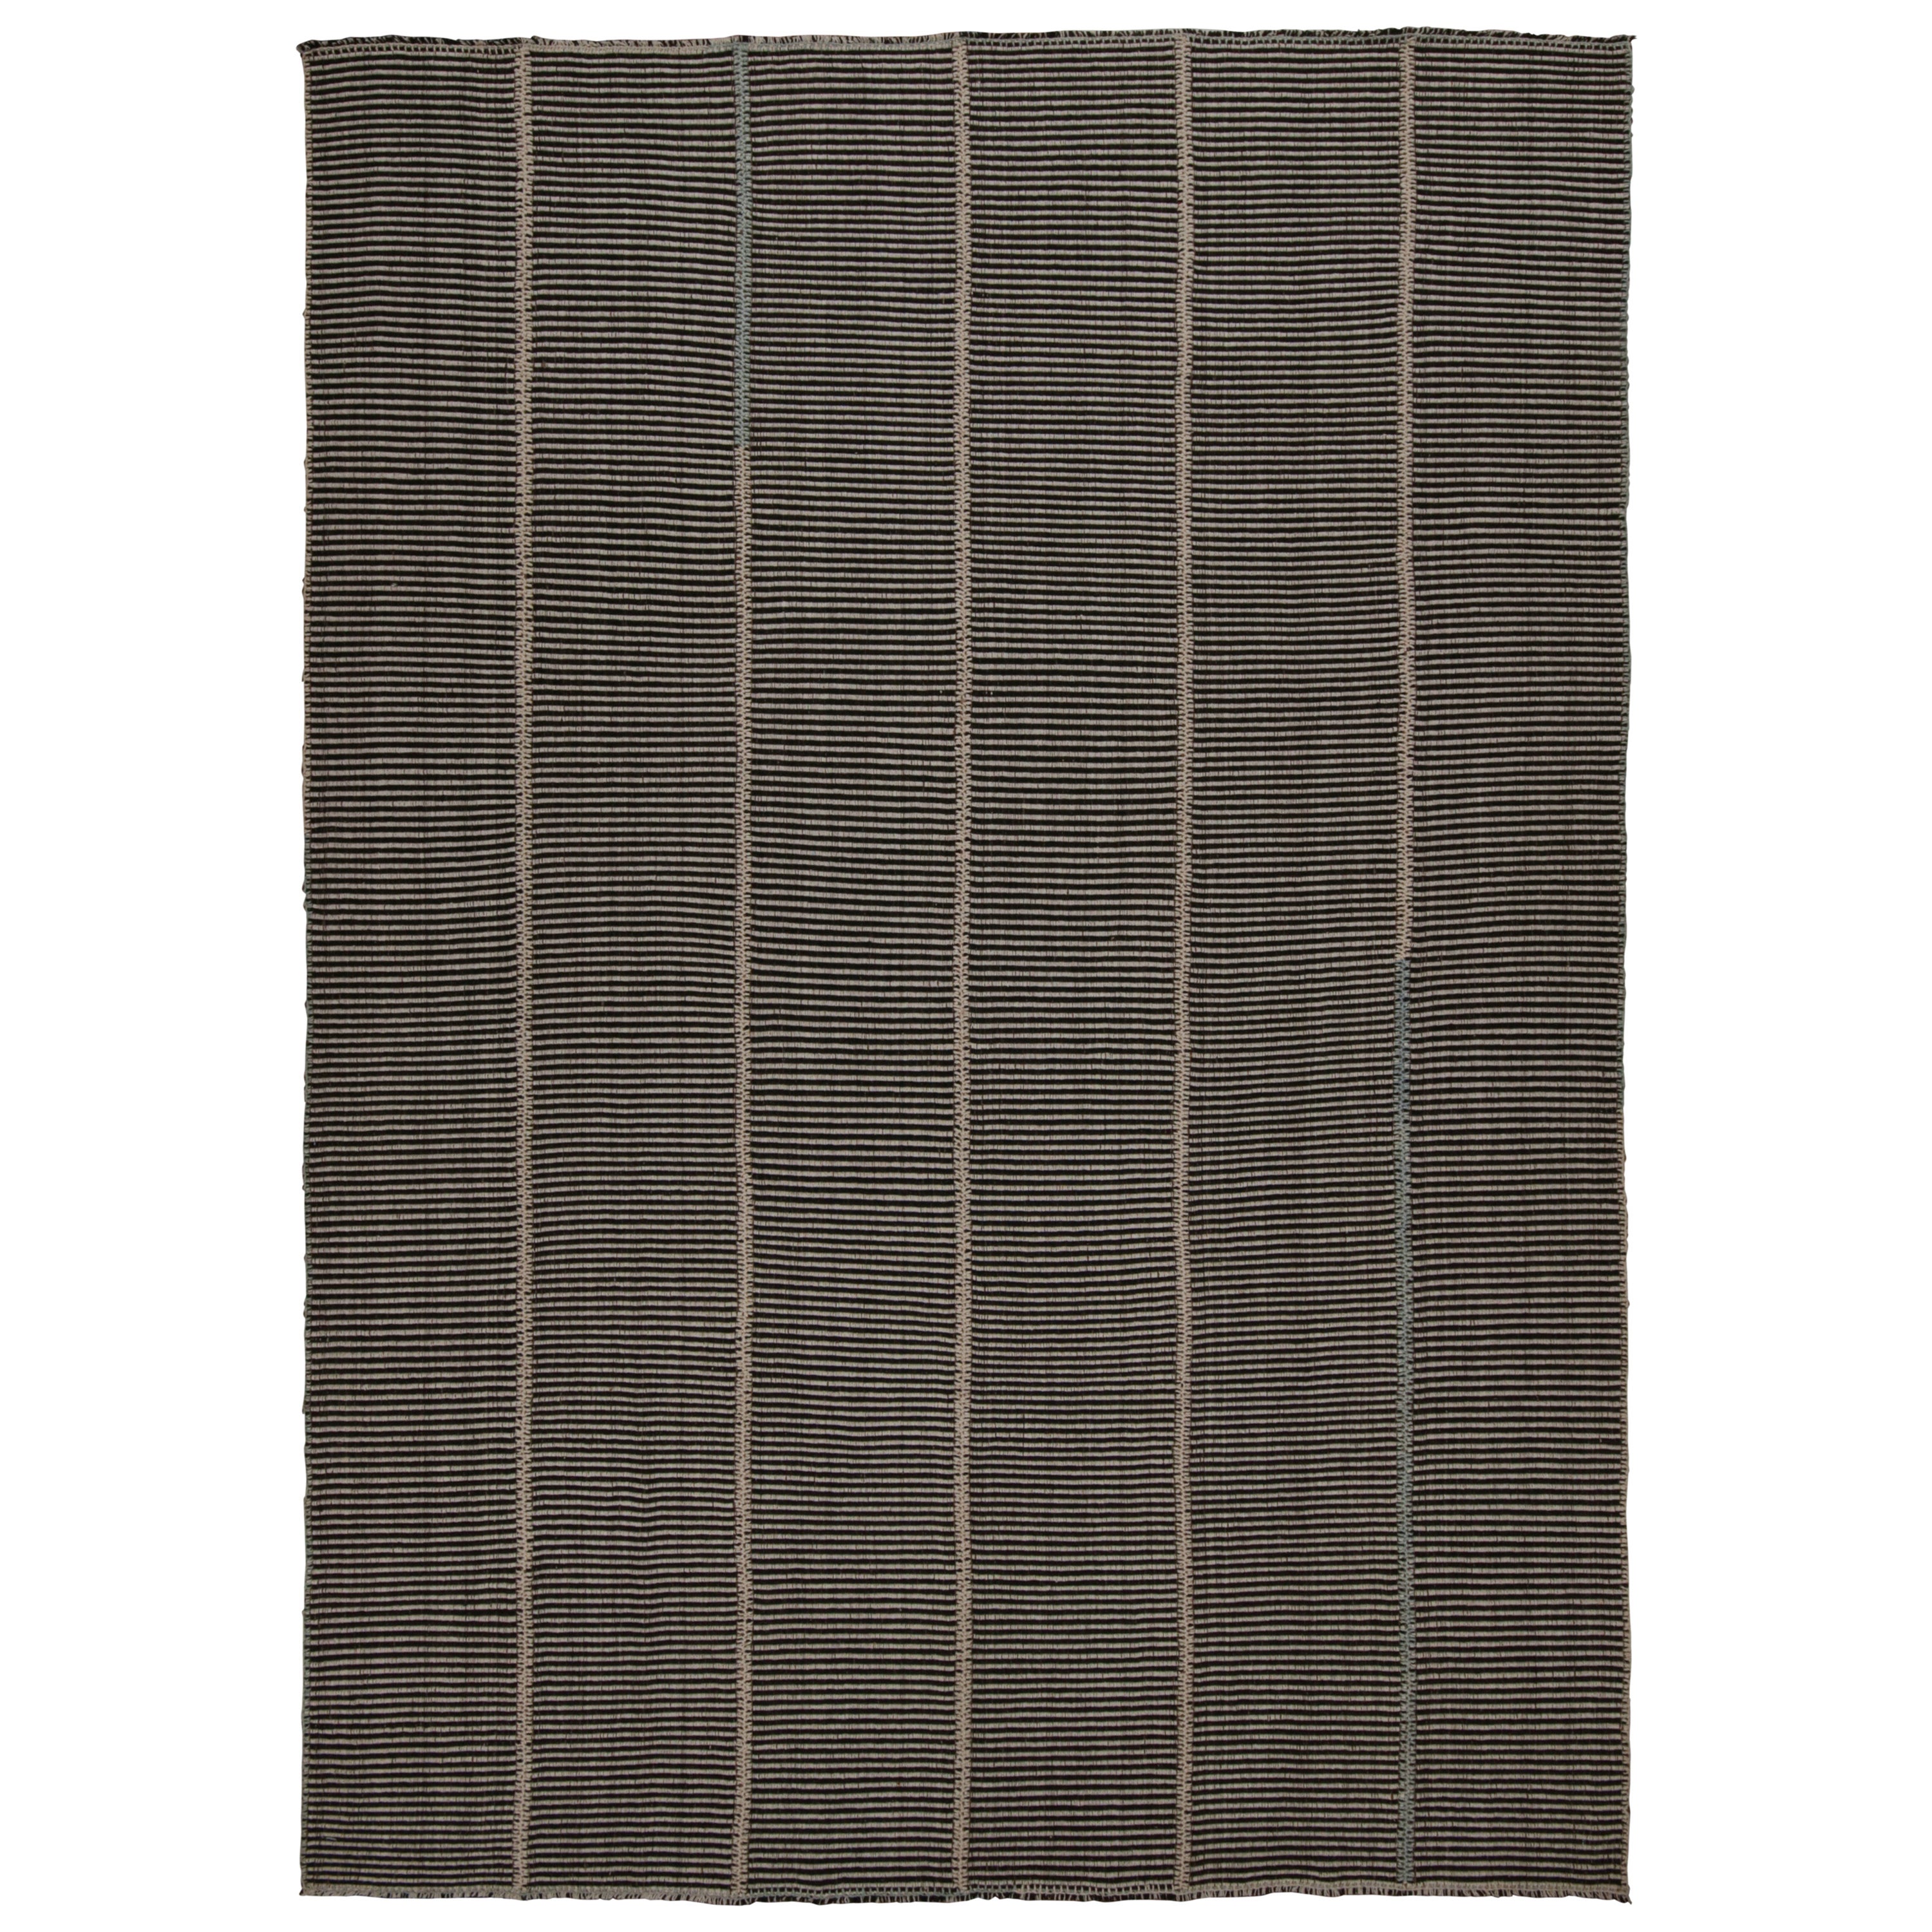 Rug & Kilim’s Contemporary Kilim in Black, with Brown and Green Accents